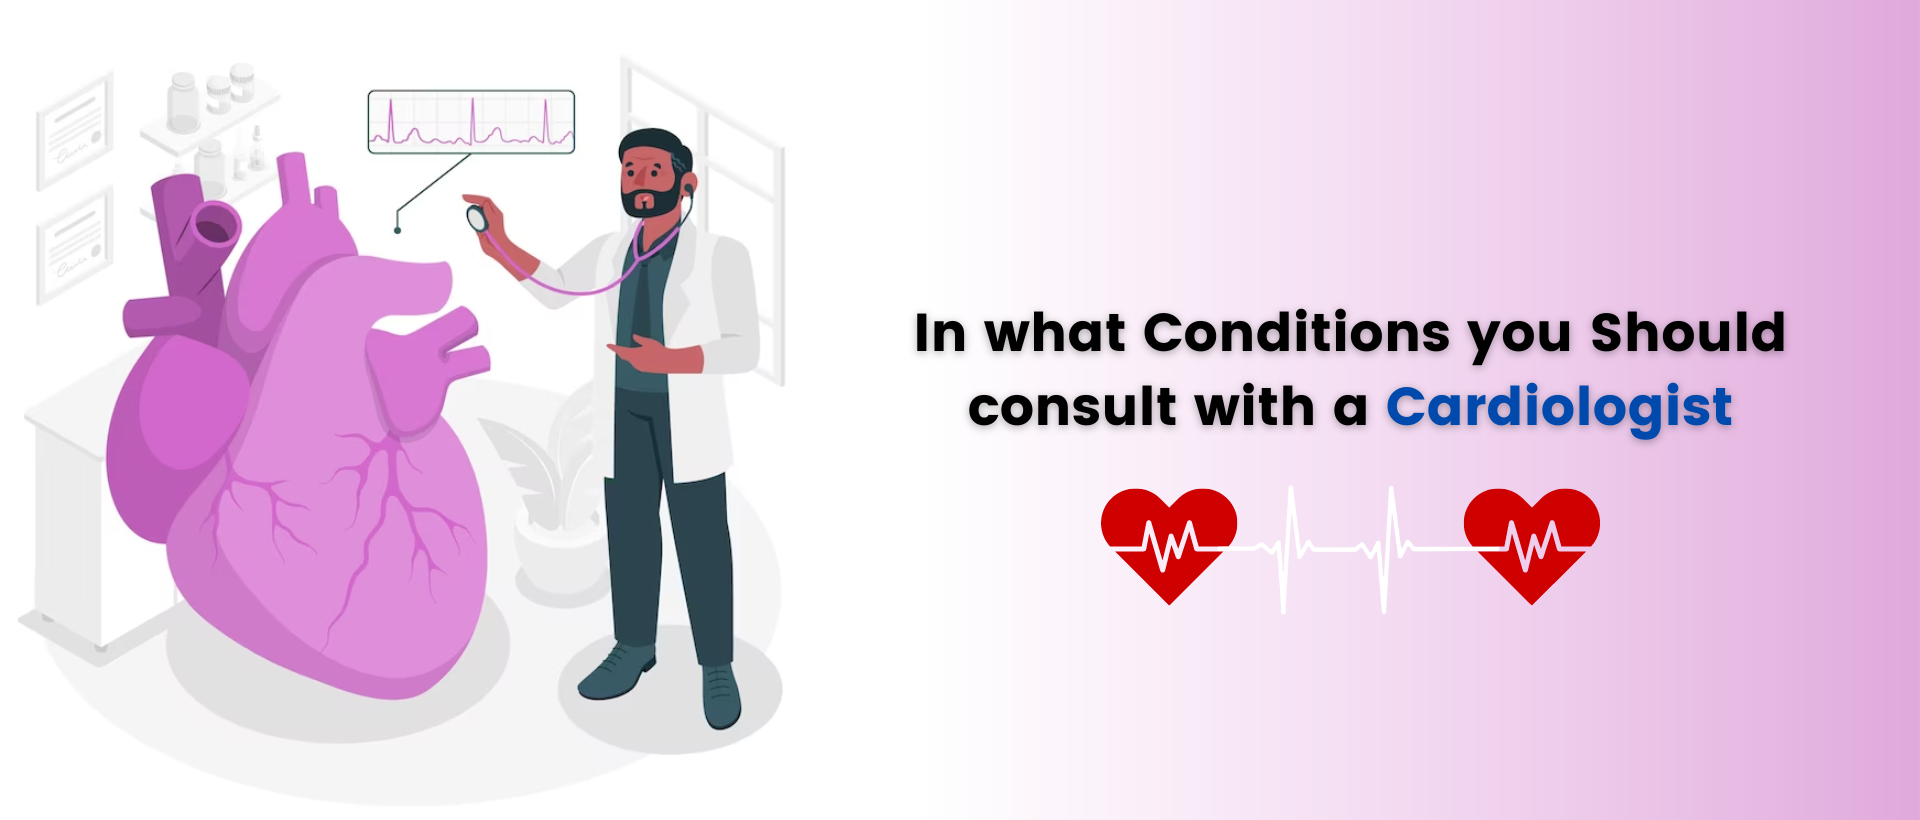 In what conditions you should consult with a cardiologist